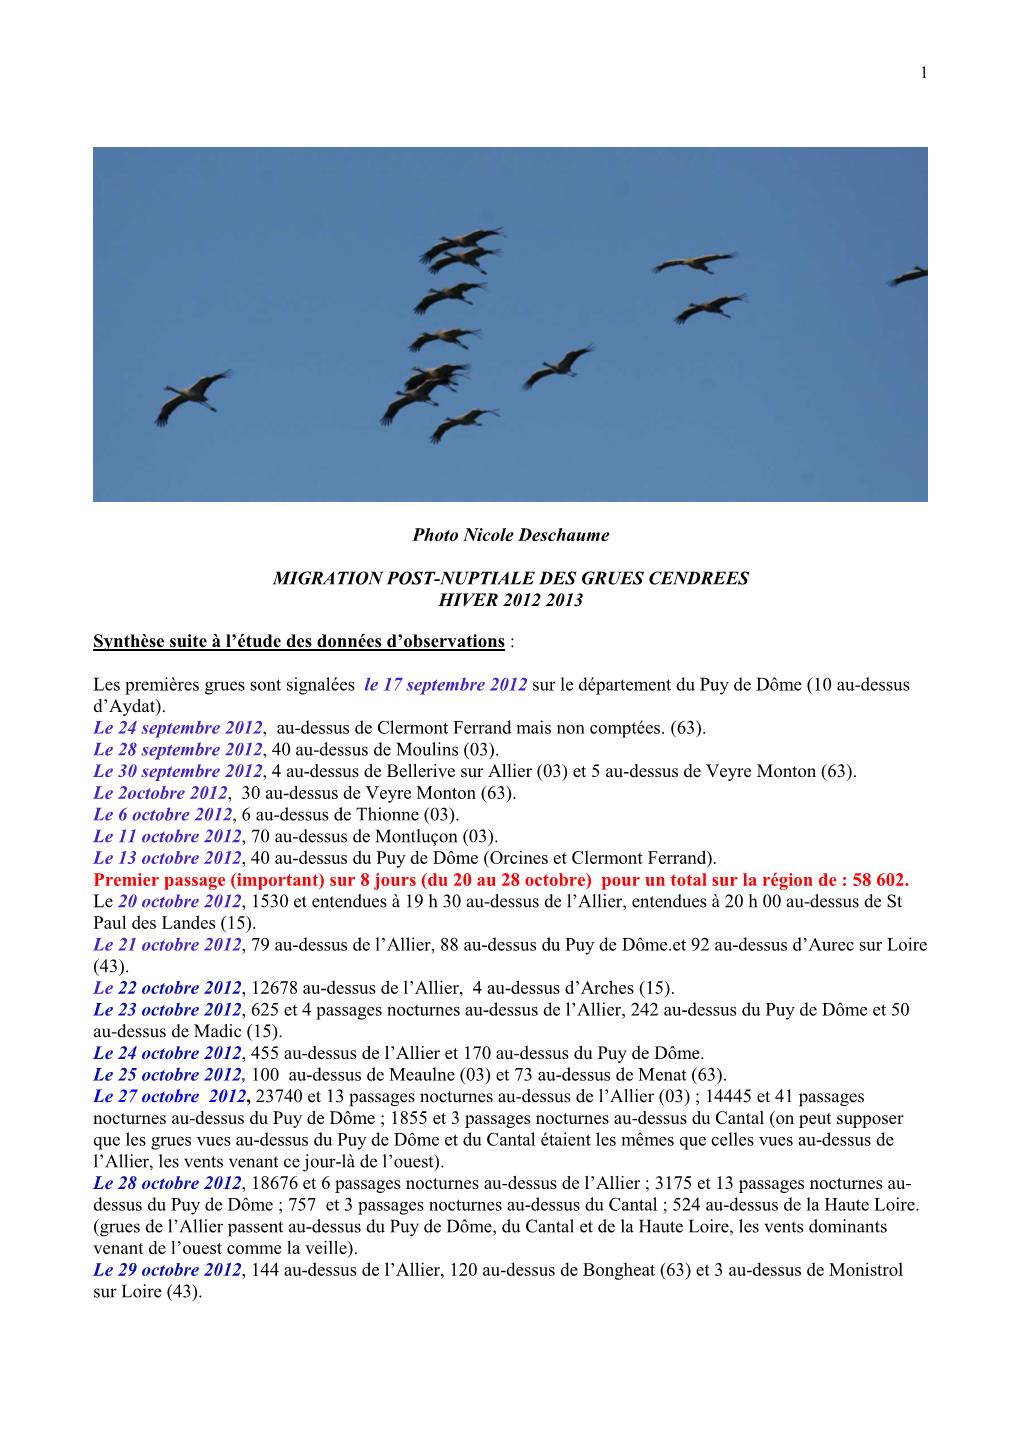 Synthese Migration Grues Hiver 2012 2013